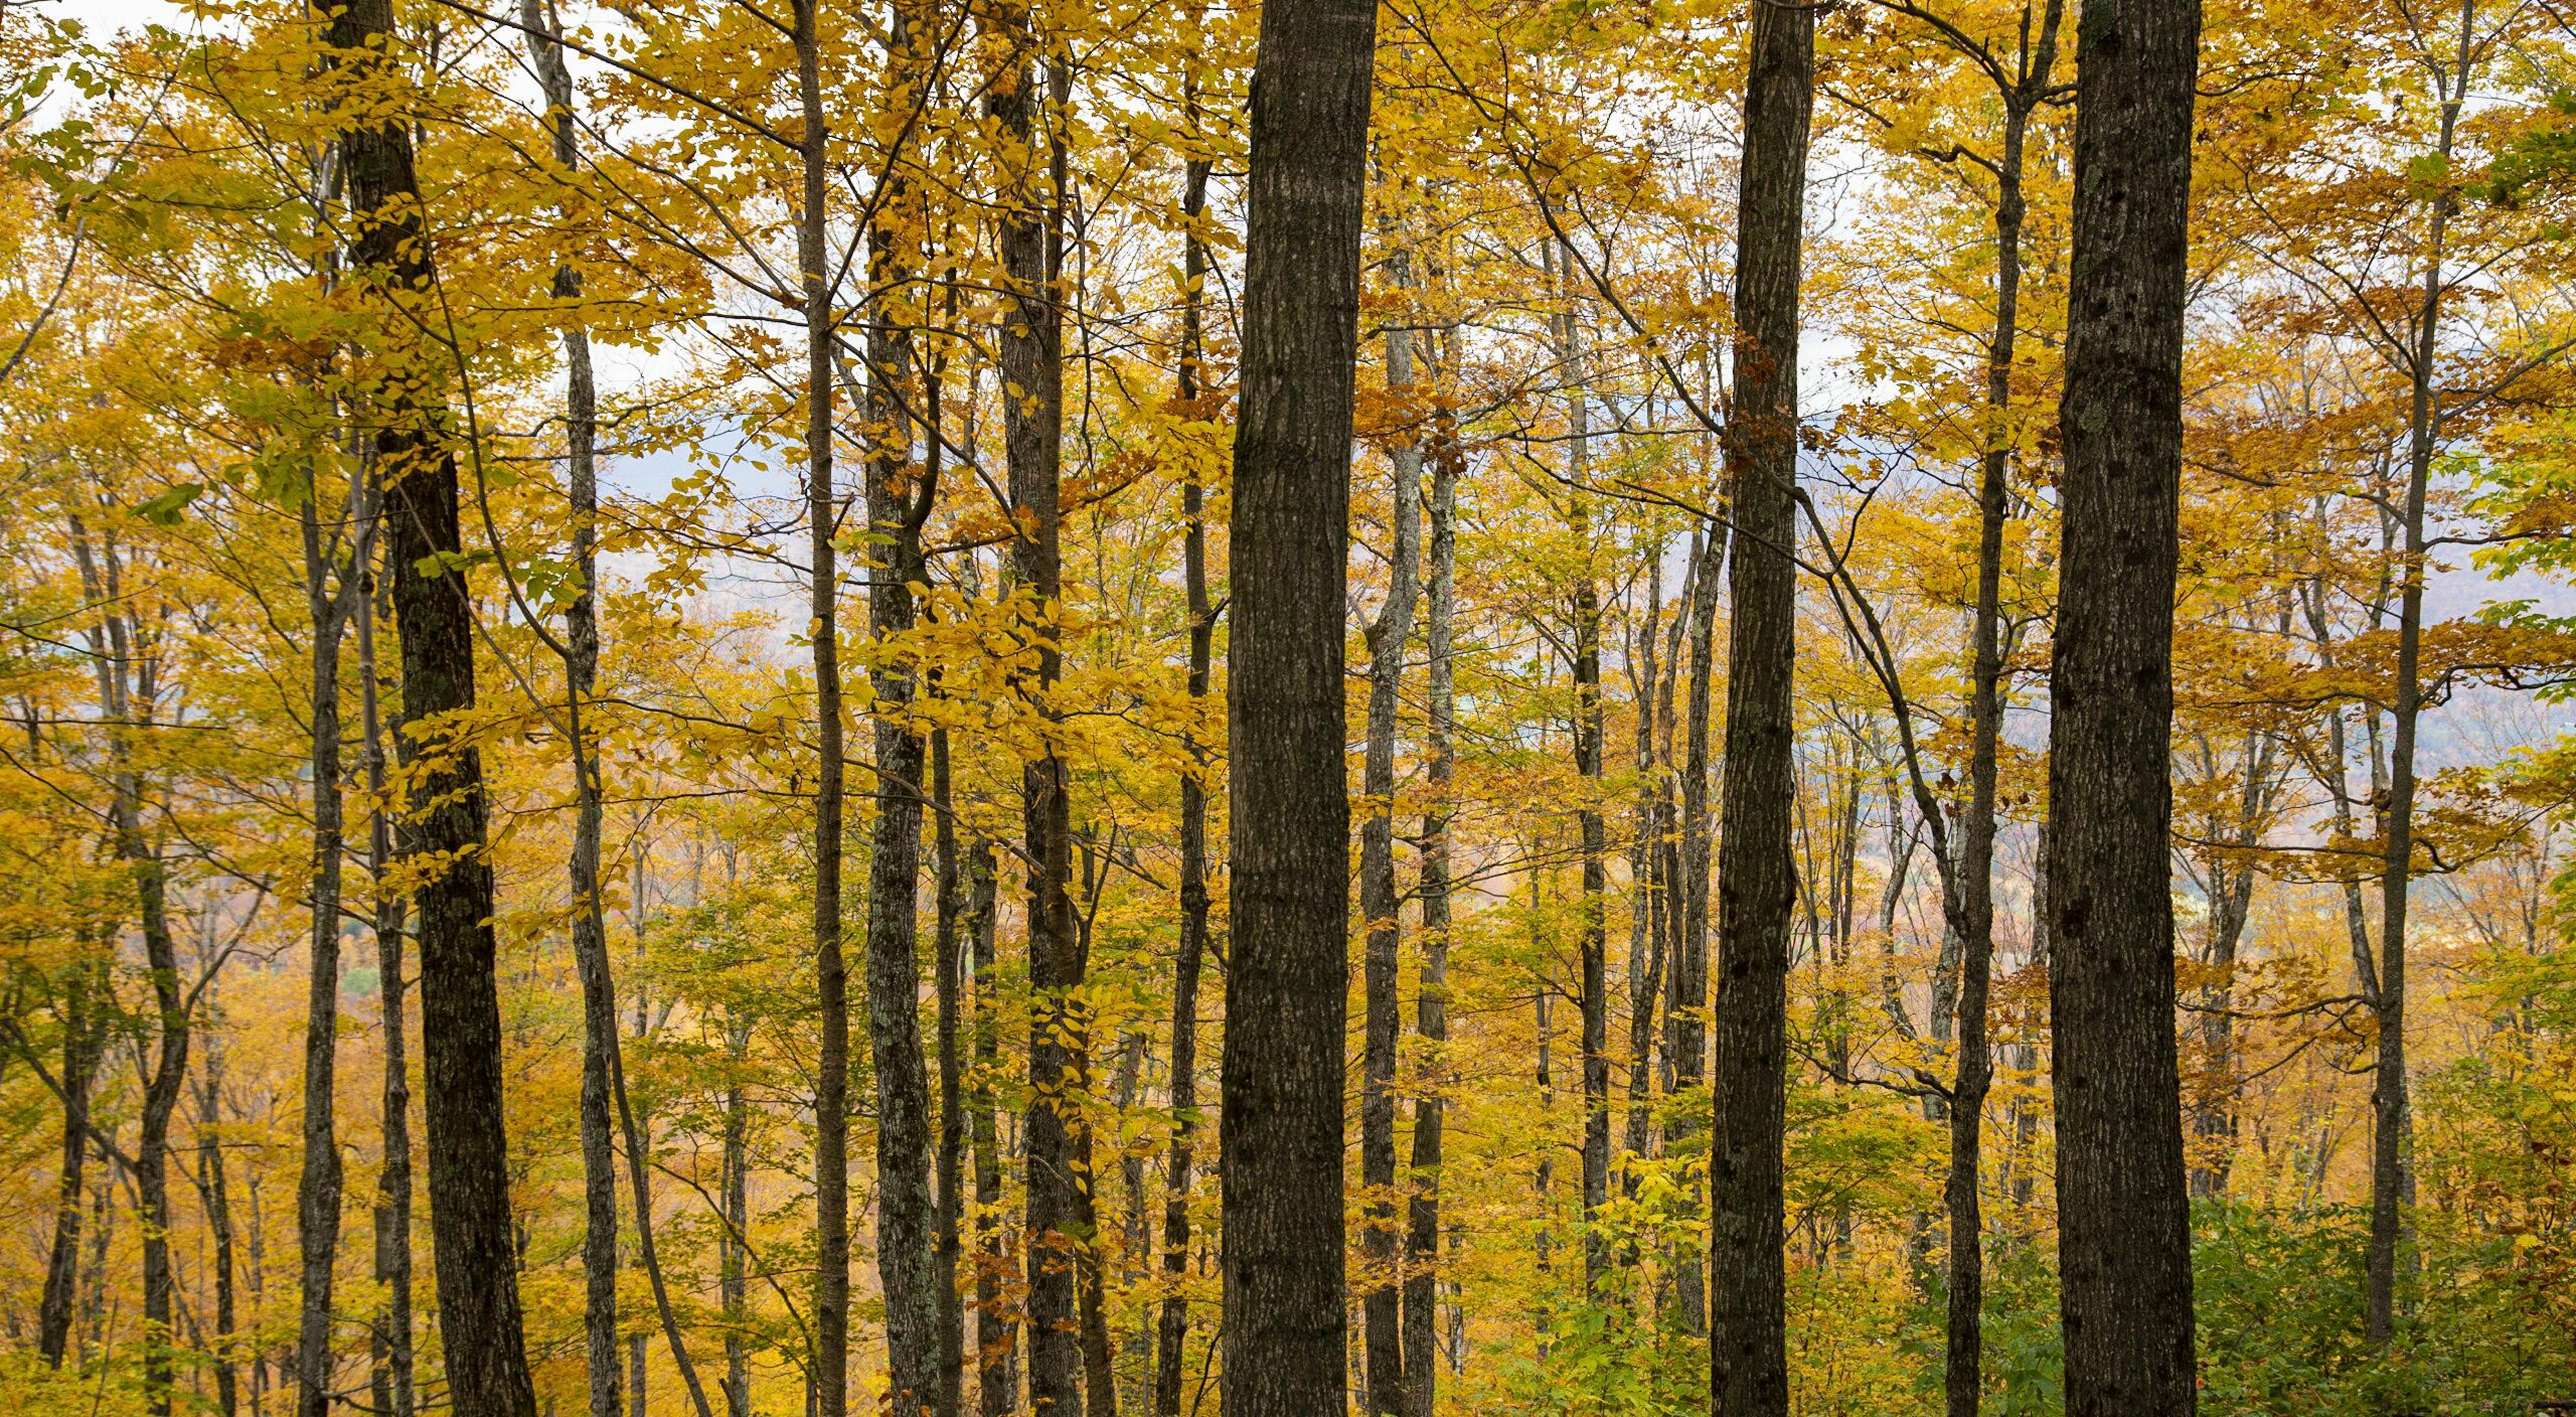 View looking into an autumn forest of trees with yellow leaves.